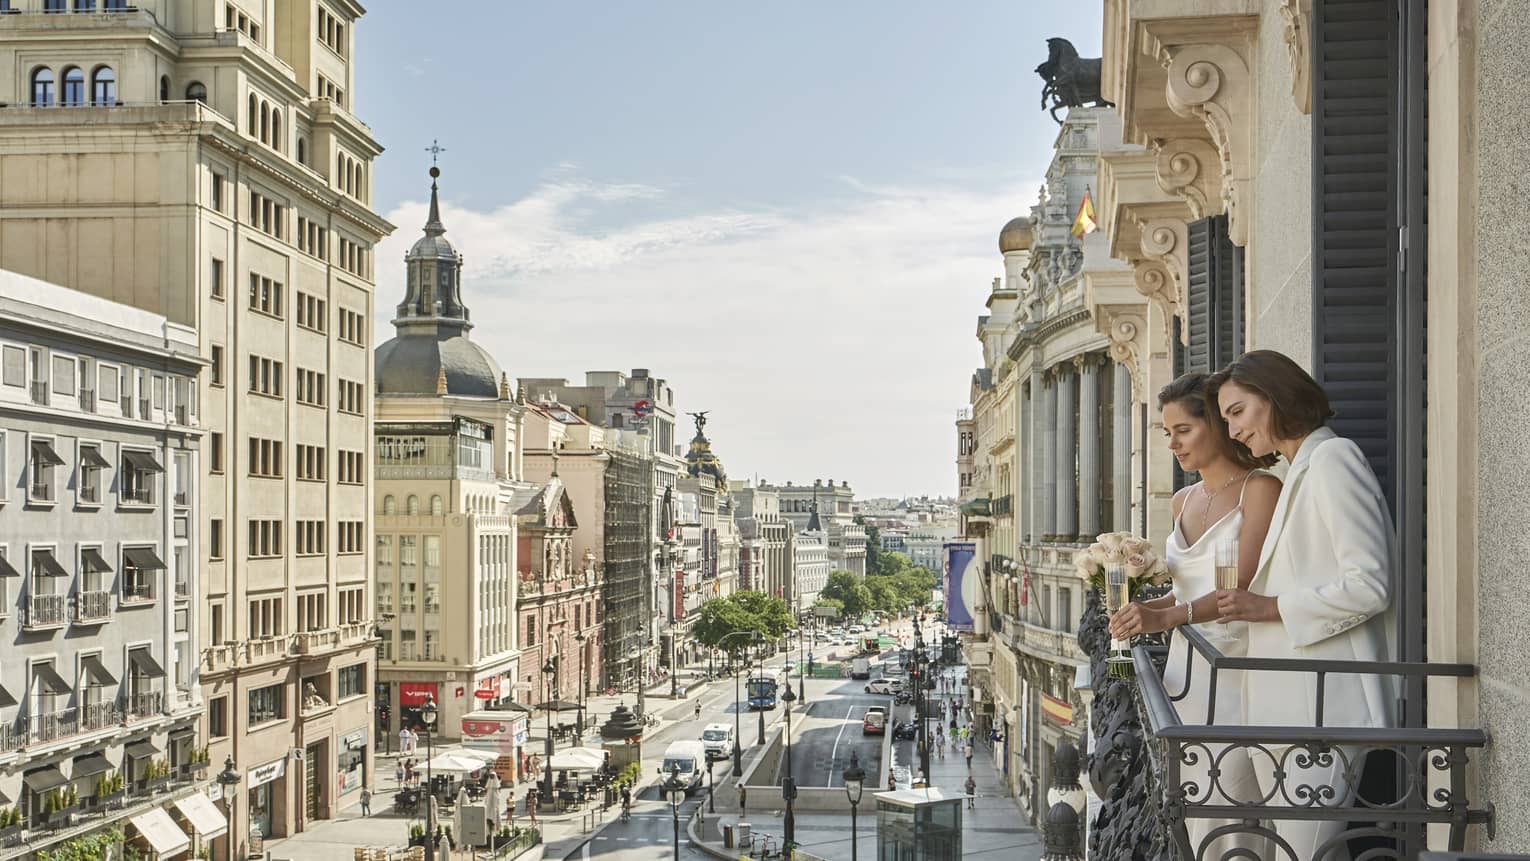 Two women in white on a balcony look out over the bustling street of Madrid surrounded by historical buildings.